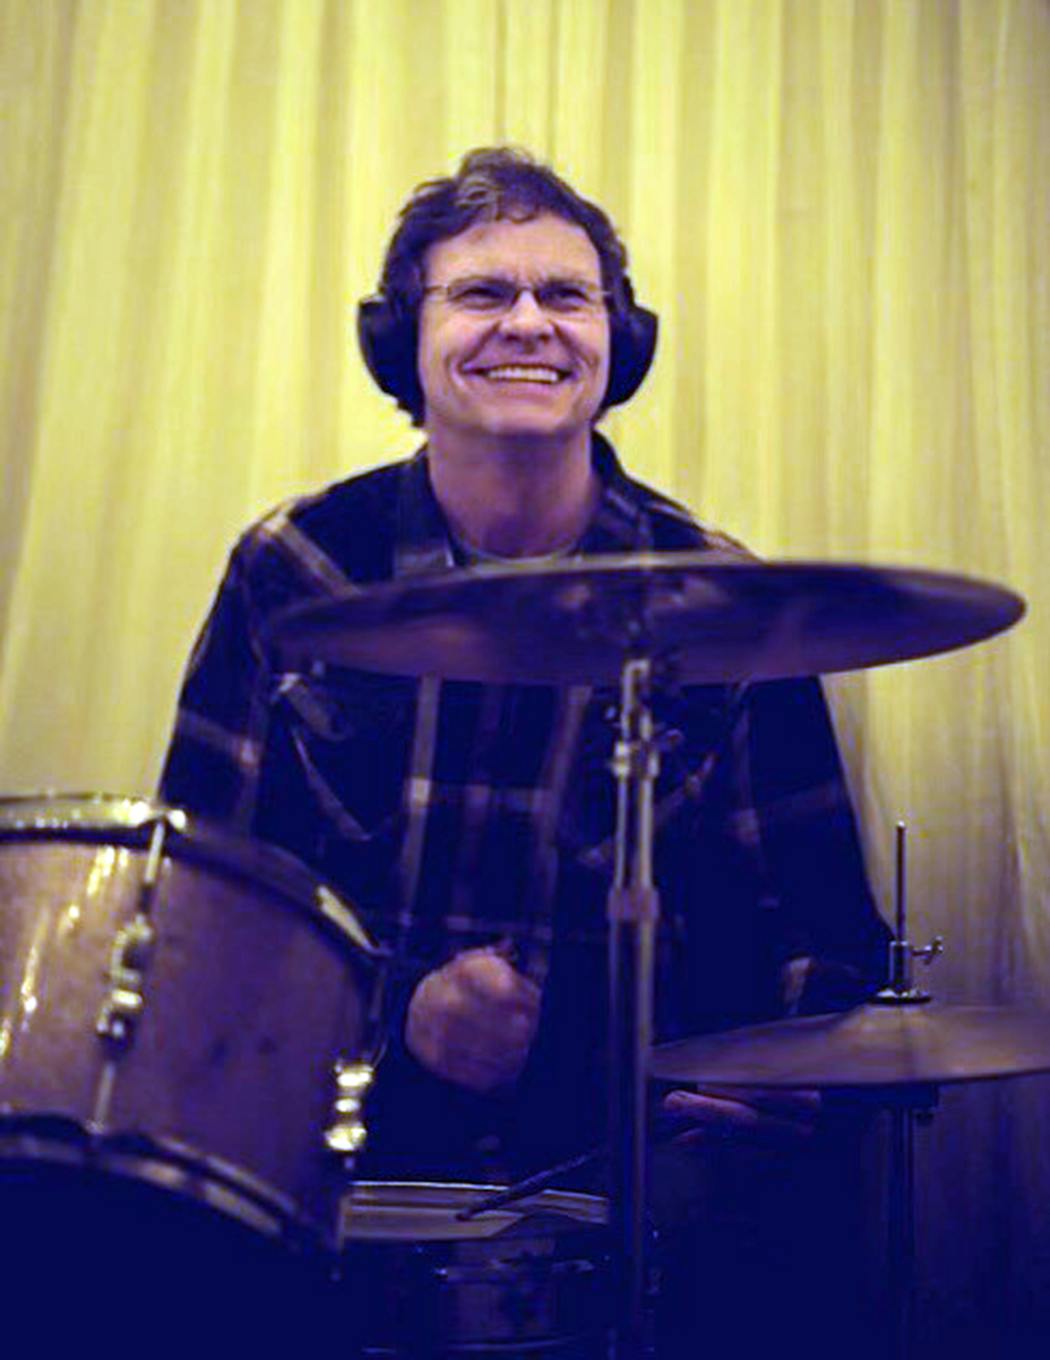 Mike Monson was an entertainer in many forms, including on the drums.